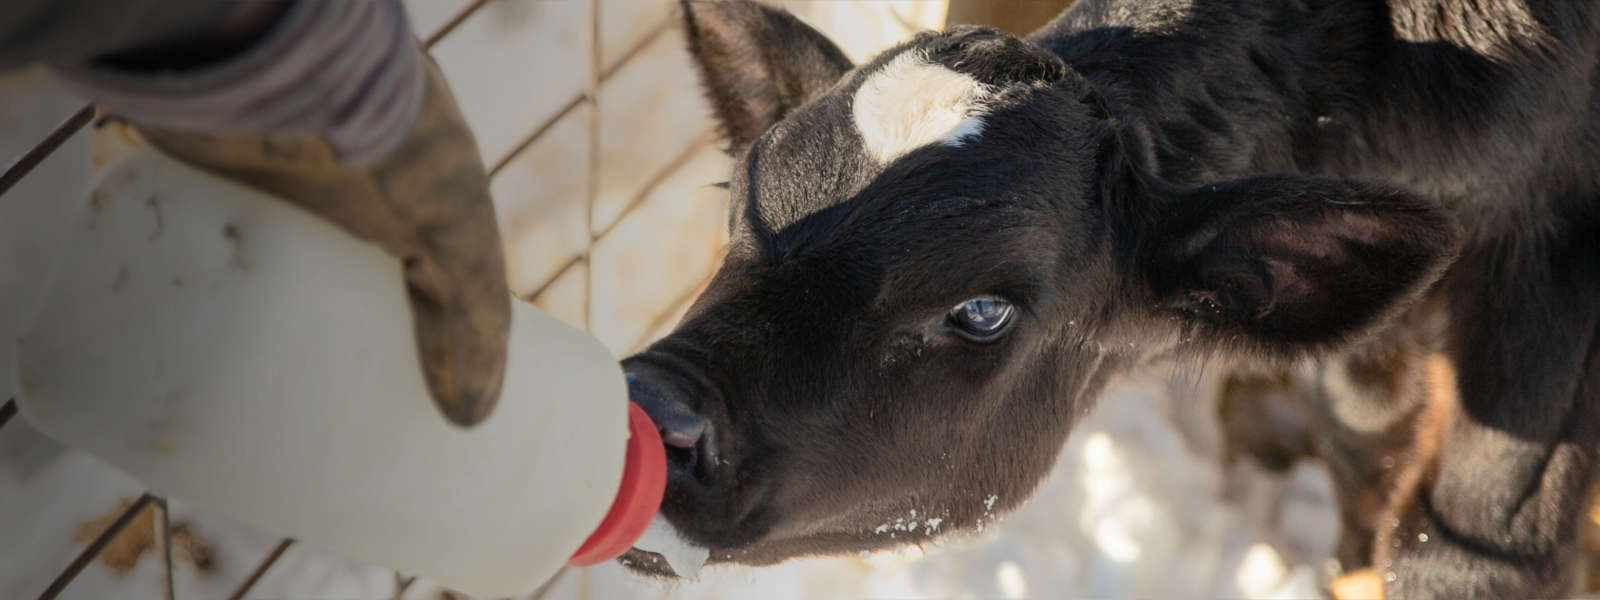 cattle health starts with the calf